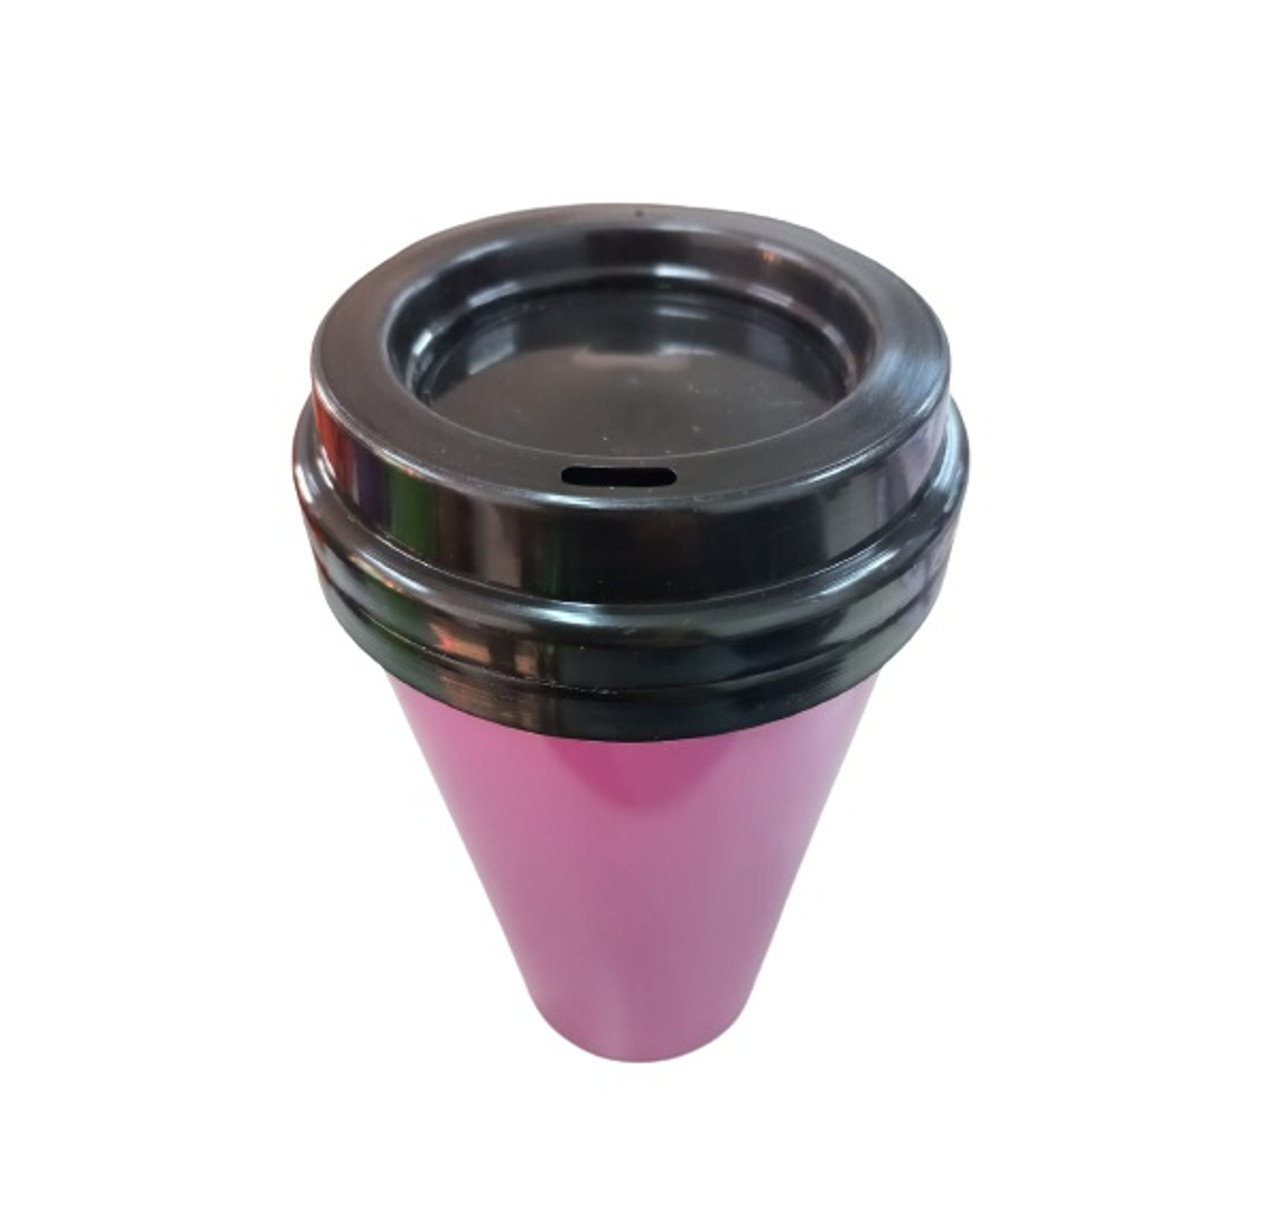 Vaso Térmico Insulated Travel Mug Thermos Cup Ideal for Coffee